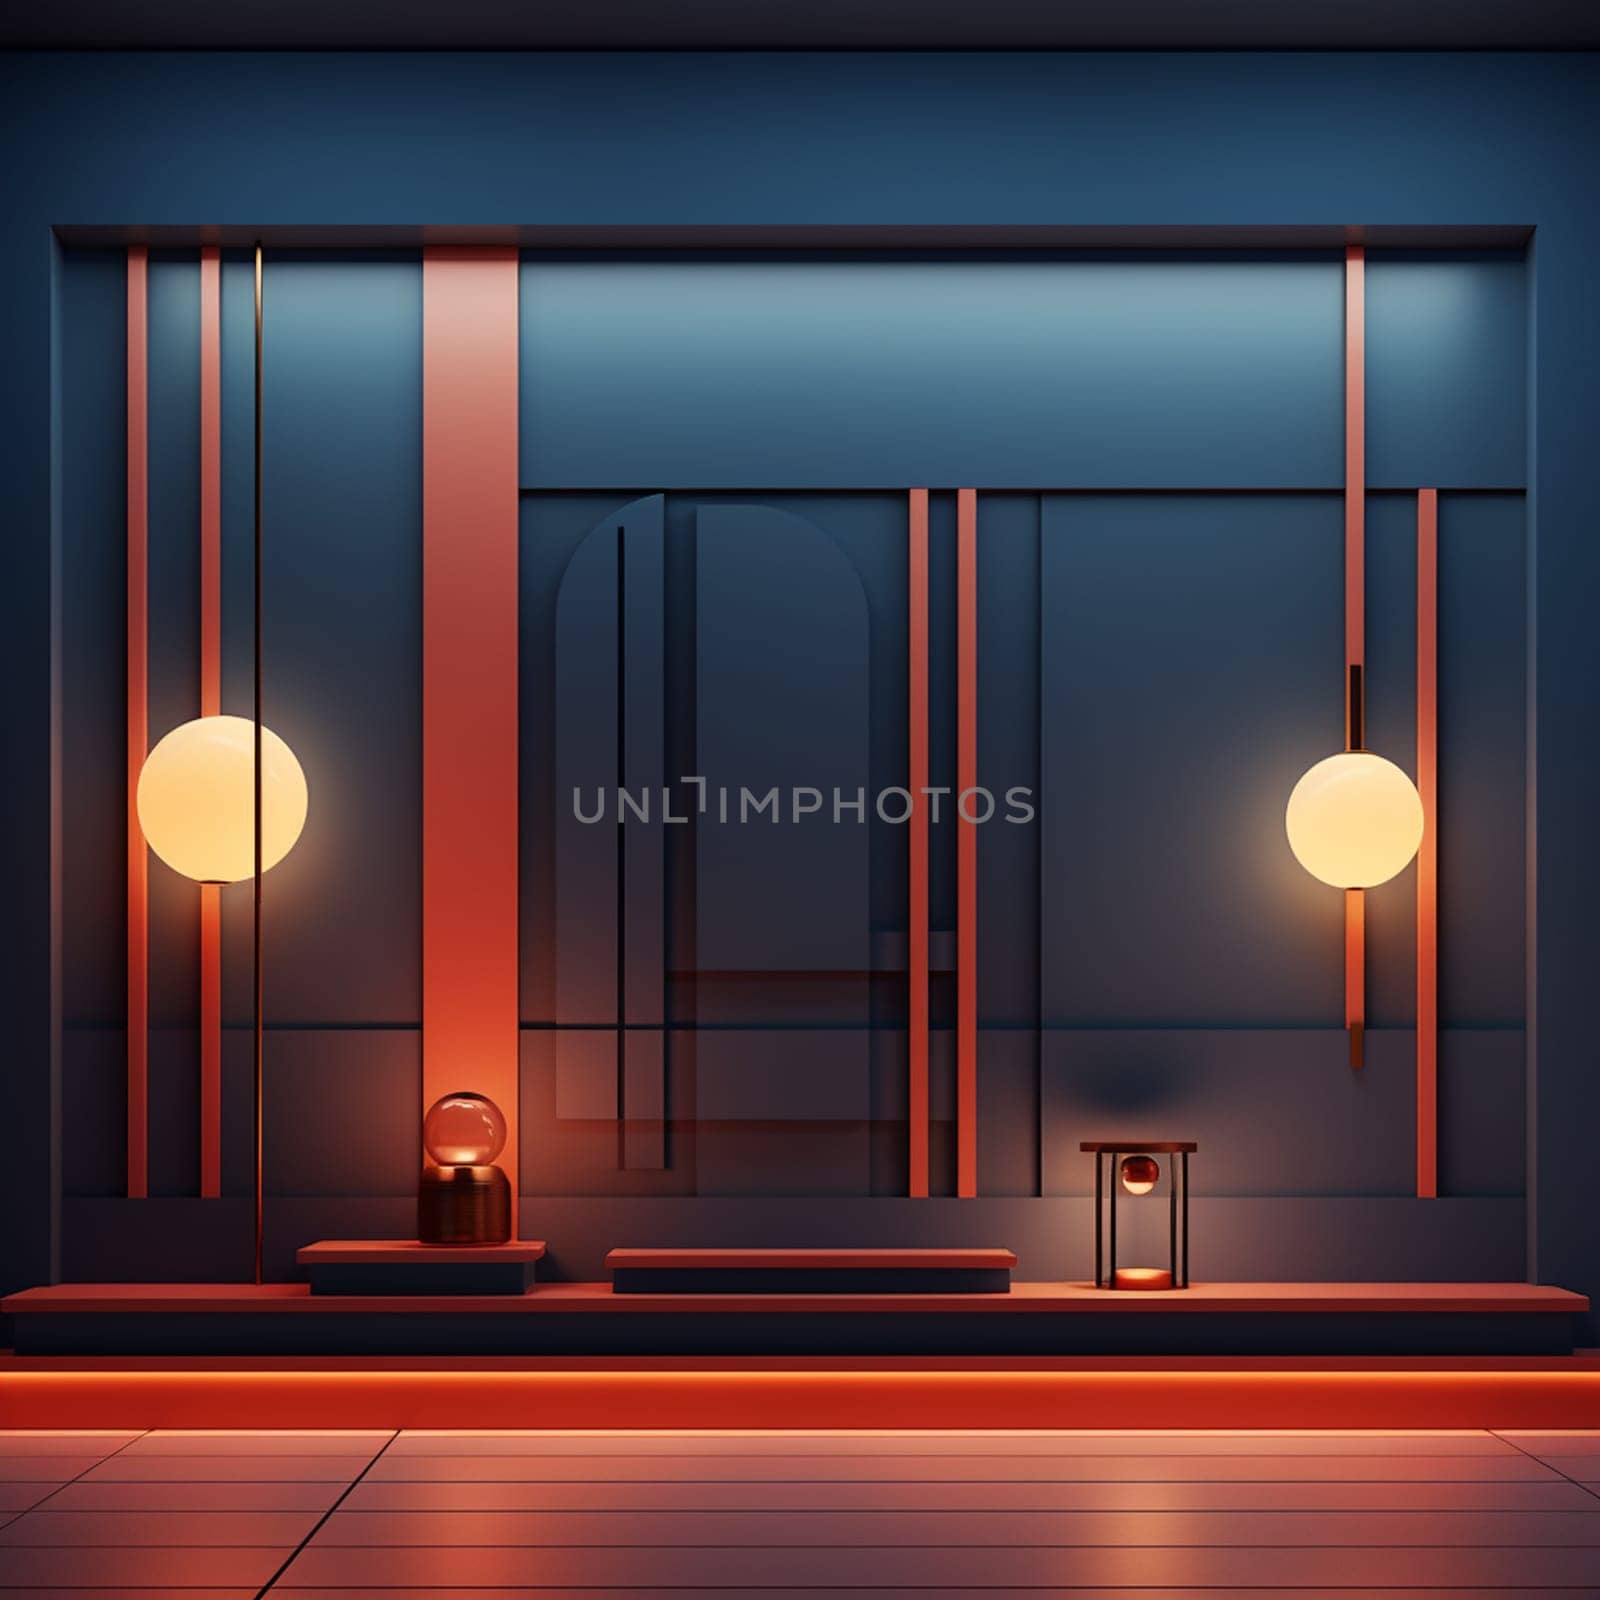 Abstract architectural white interior of a minimalist house with color gradient neon lighting. 3D illustration and rendering. High quality photo